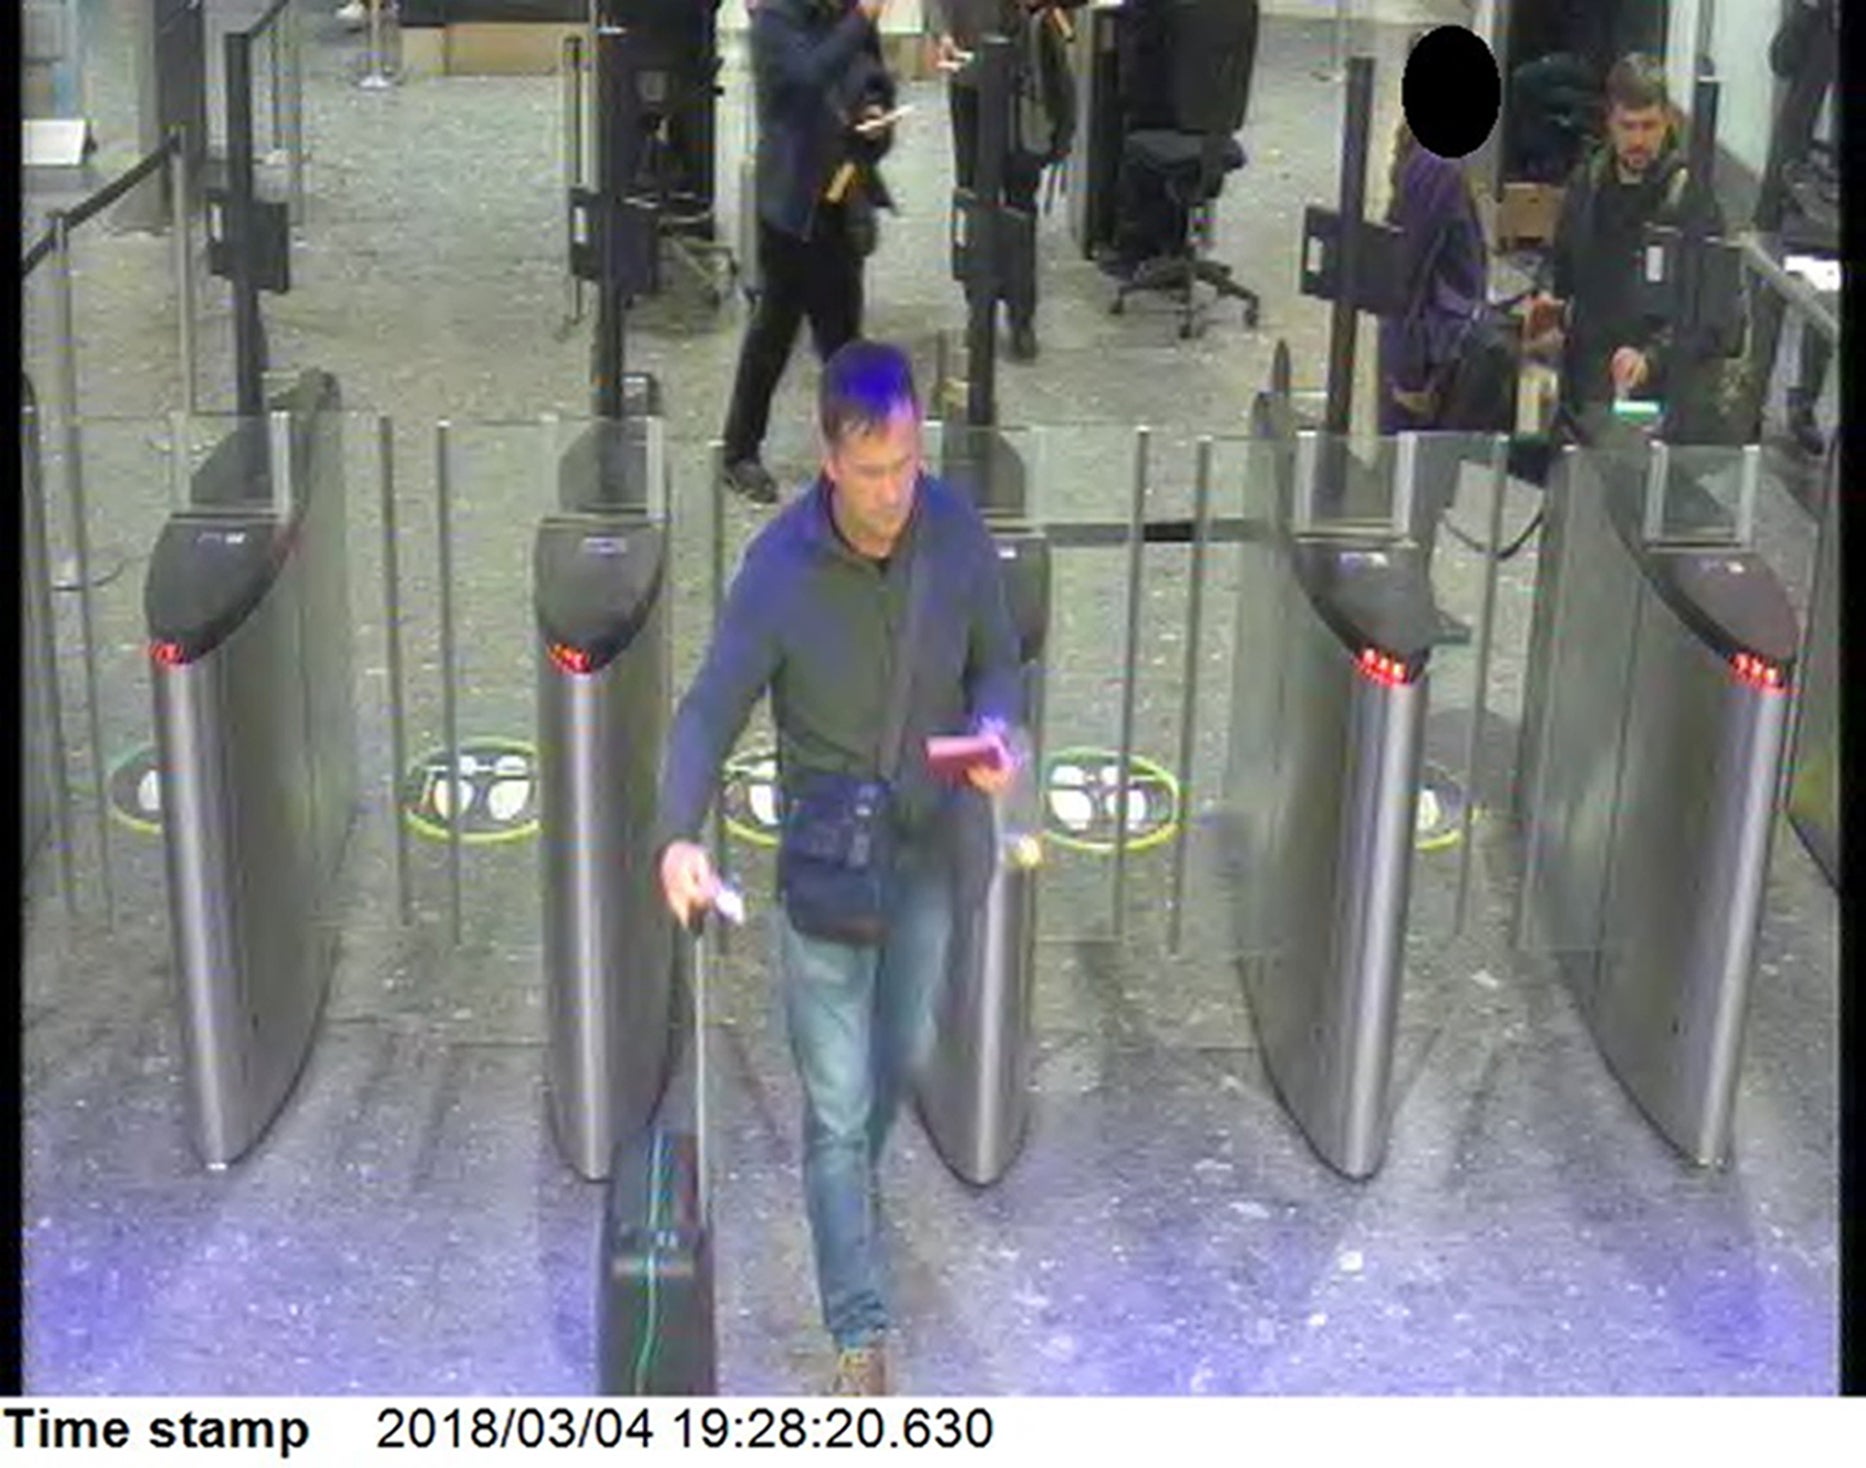 The suspects passing through passport control at London Heathrow at 7.28pm on Sunday evening (4 March)